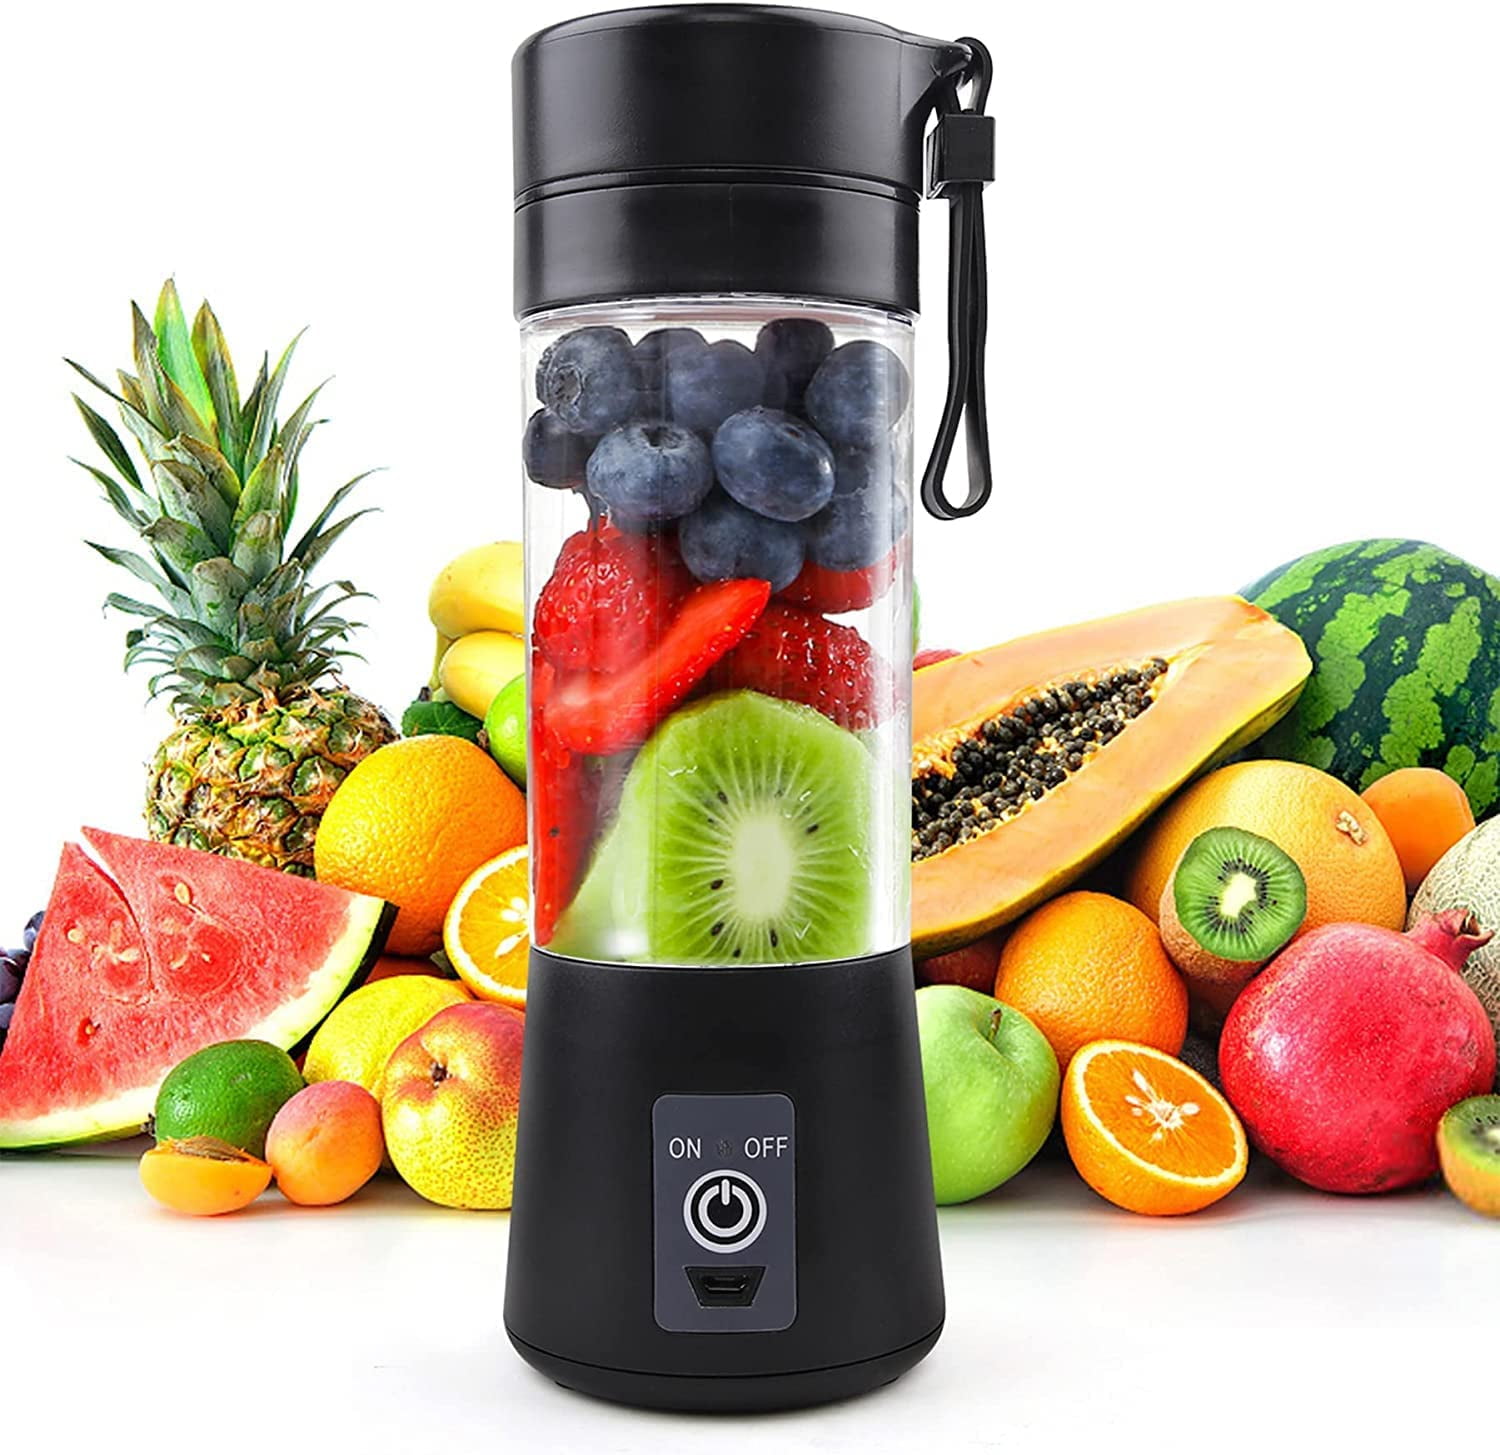 Portable Blender, MIAOKE Personal Mini Juice Blender, USB Rchargeable Juicer Cup with Six Blades in 3D, Smoothie Blender Home/Office/Outdoors